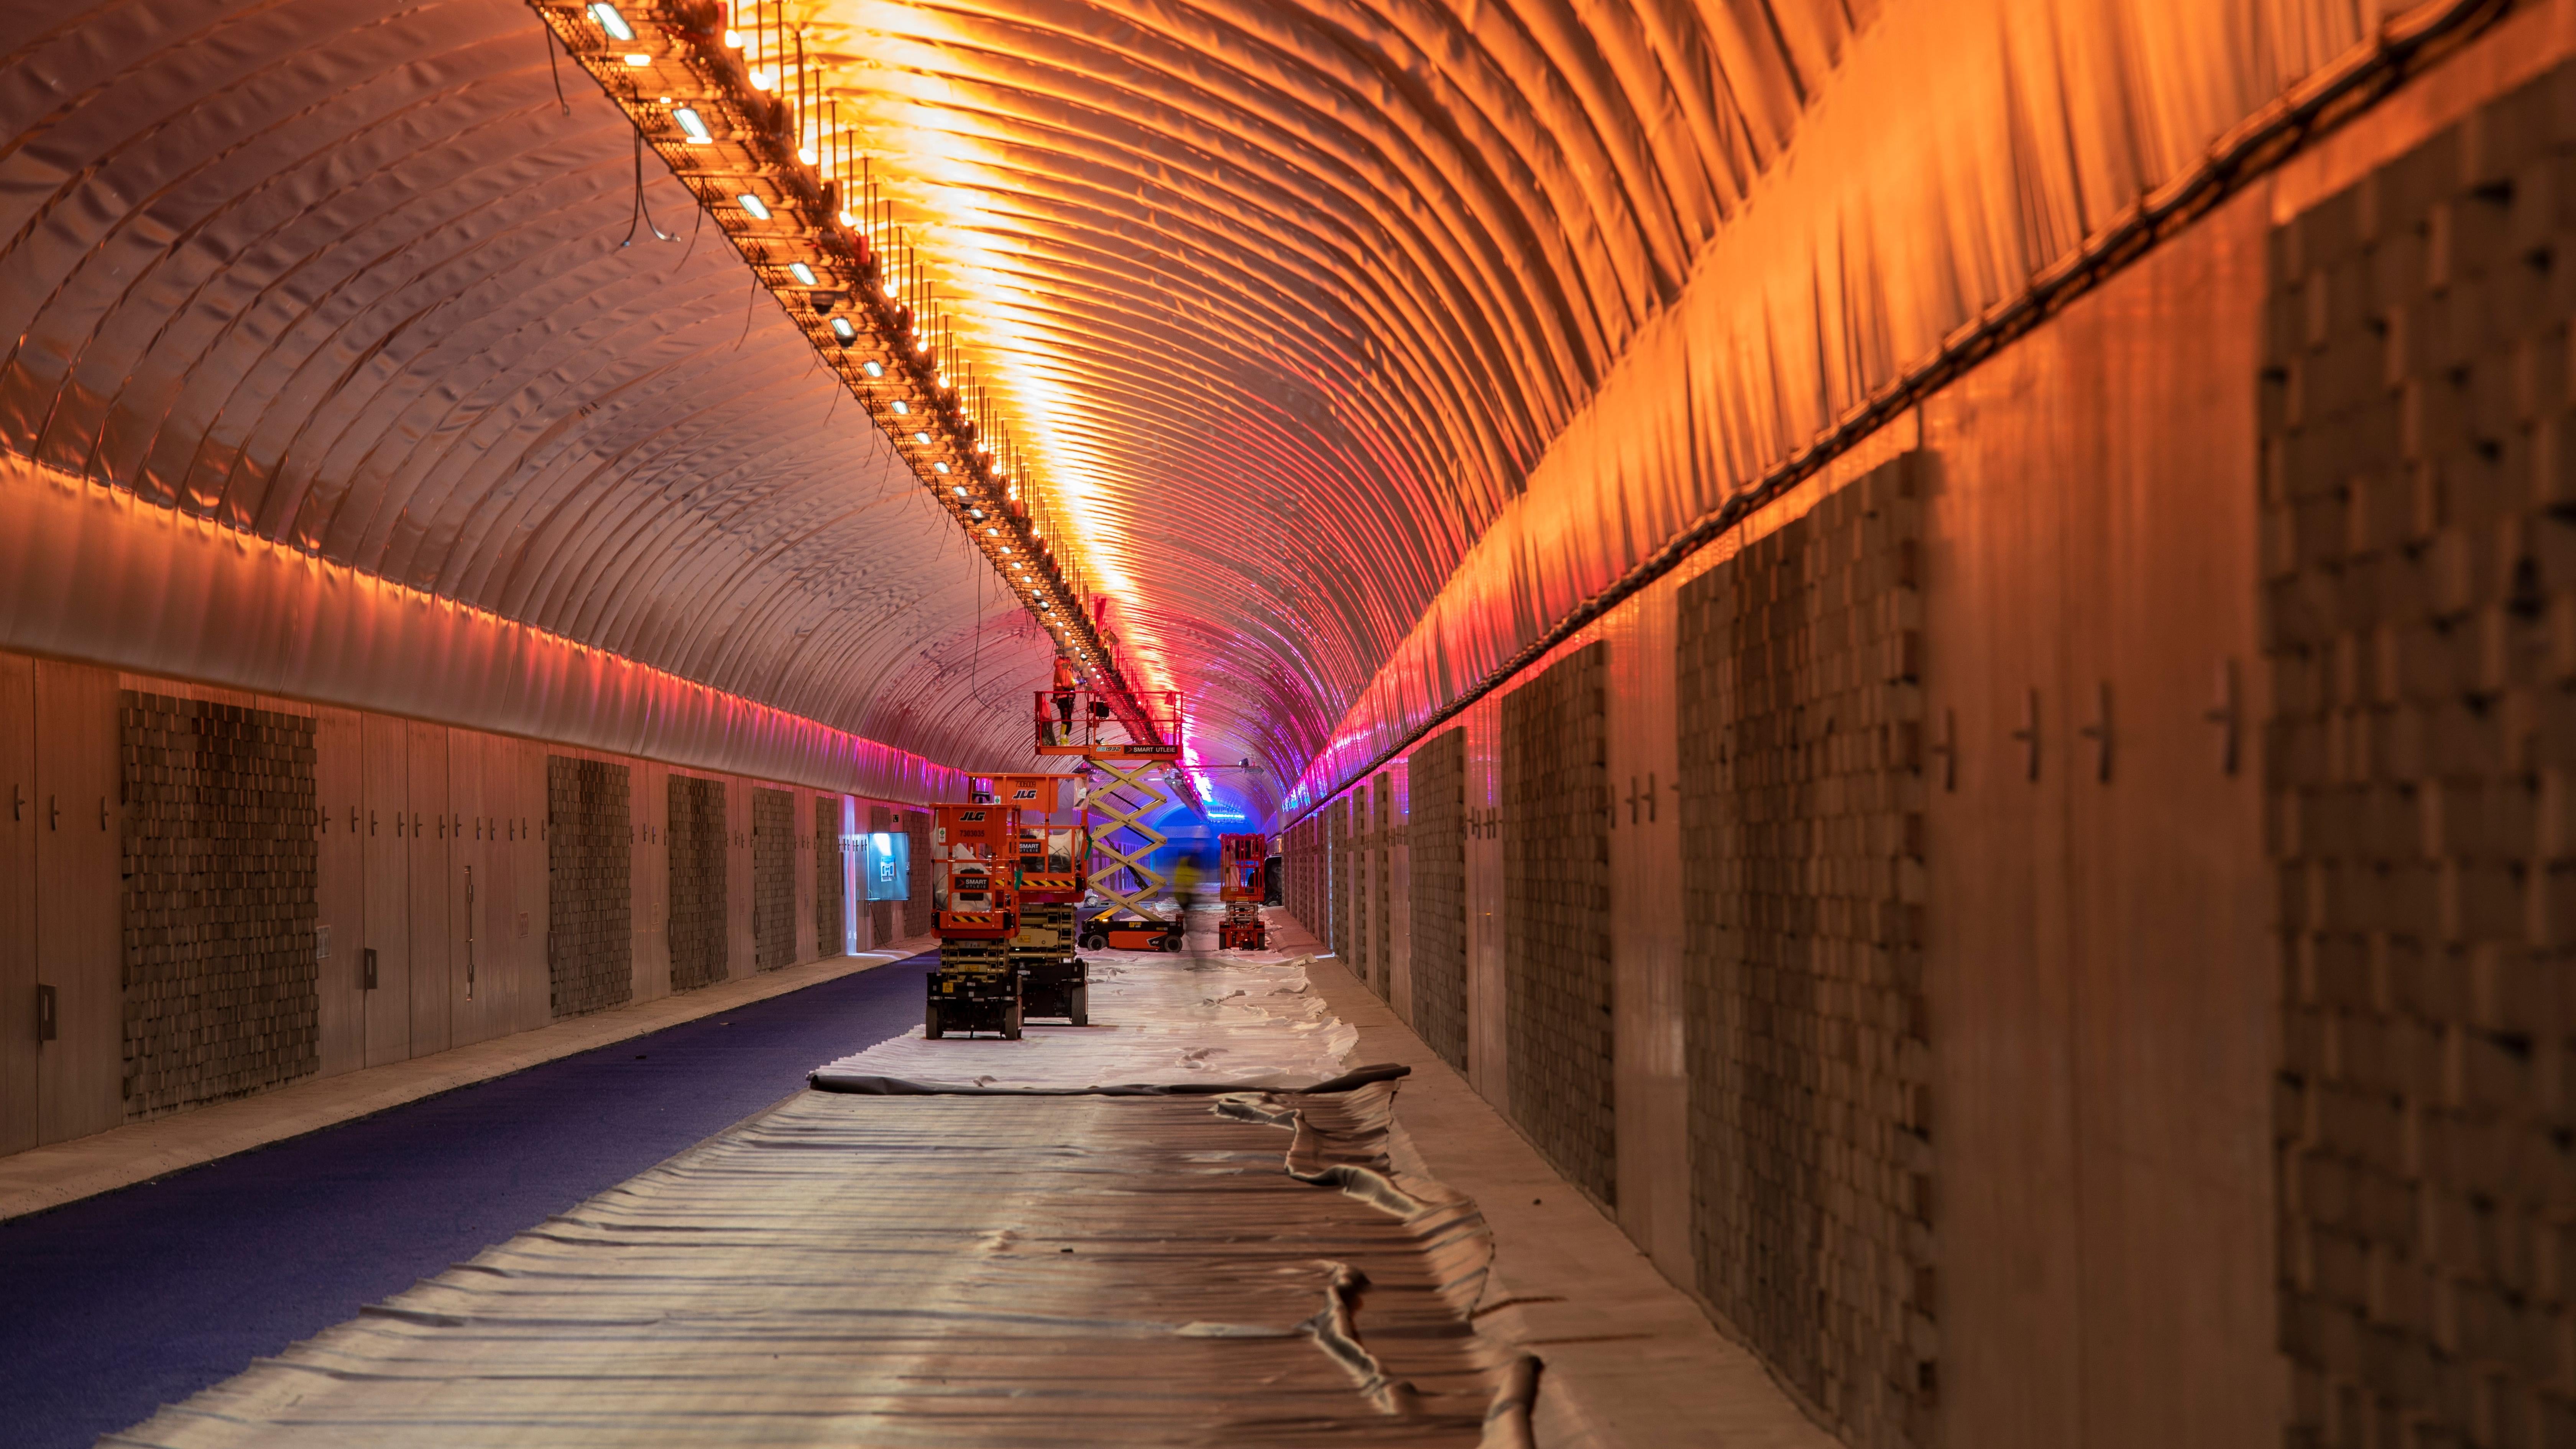 The World’s Longest Bicycle Tunnel Opens in Norway Next Month